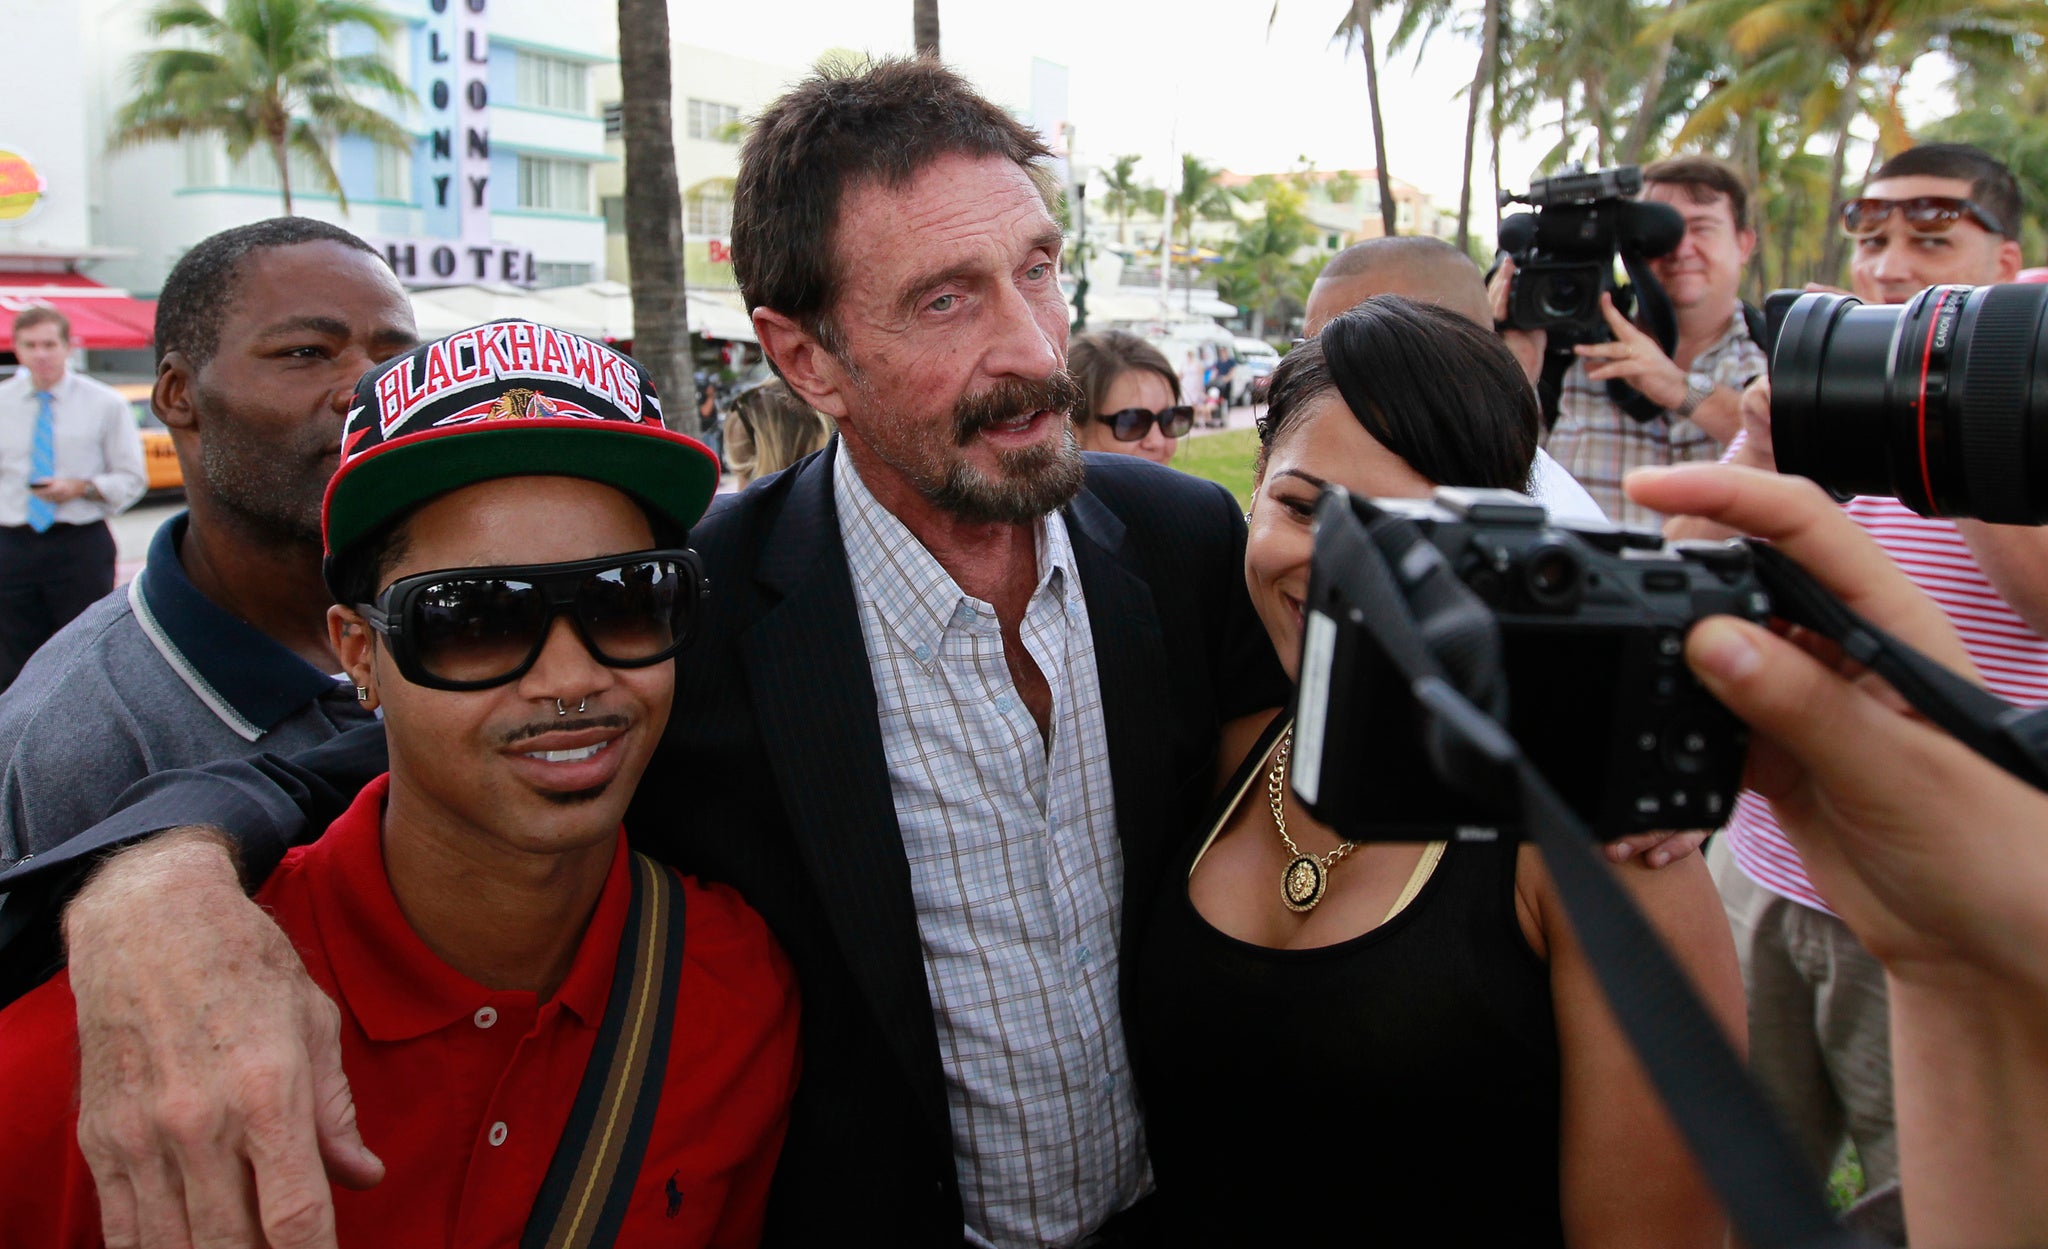 Computer software pioneer John McAfee (C) poses with tourists as he speaks with reporters outside his hotel in Miami Beach, Florida December 13, 2012.